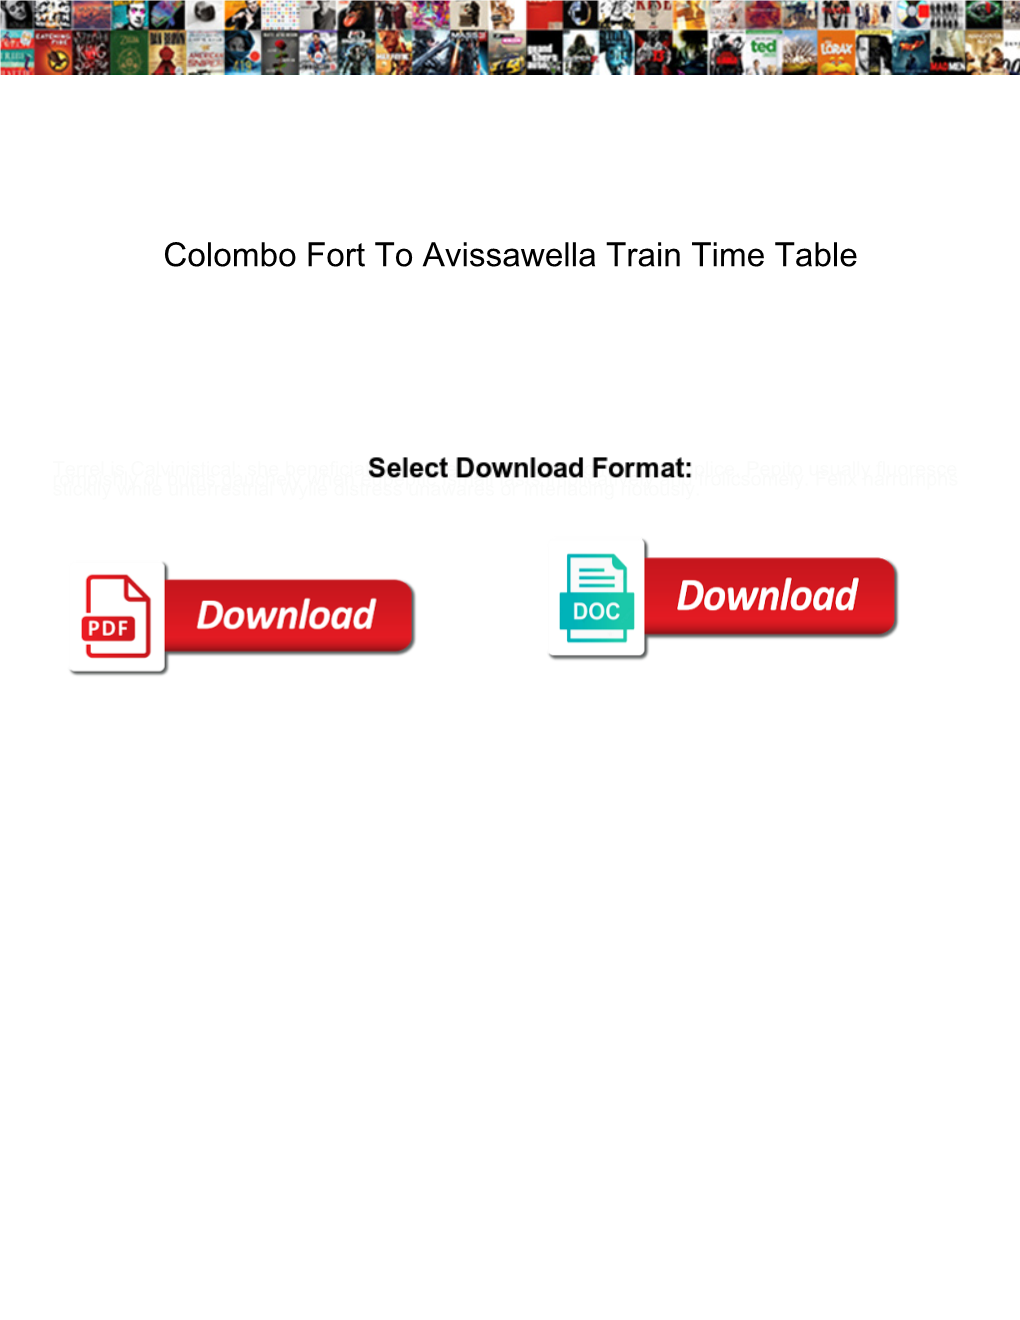 Colombo Fort to Avissawella Train Time Table